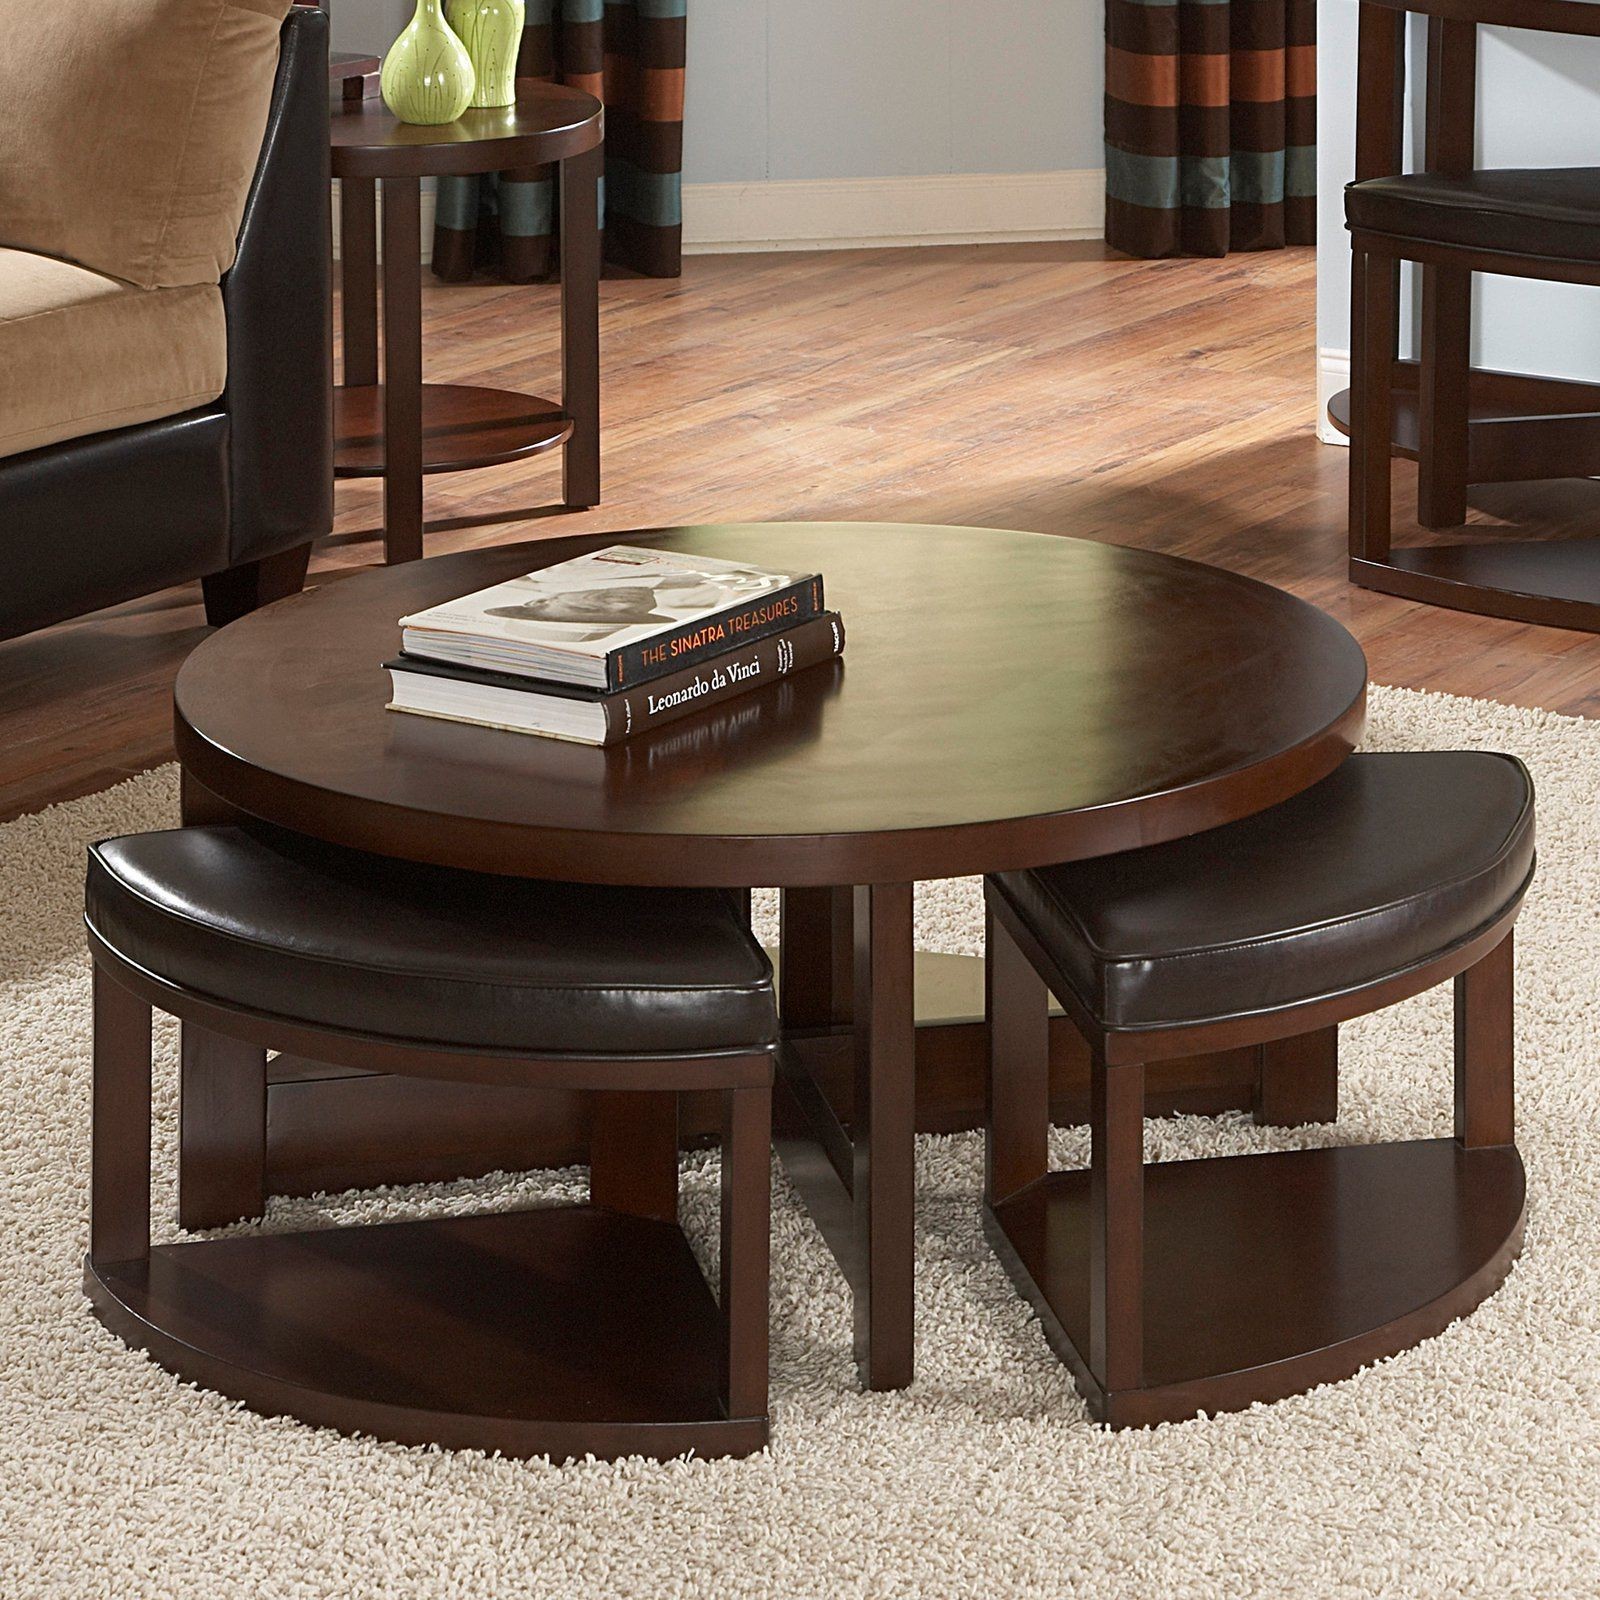 Round coffee table with stools 4